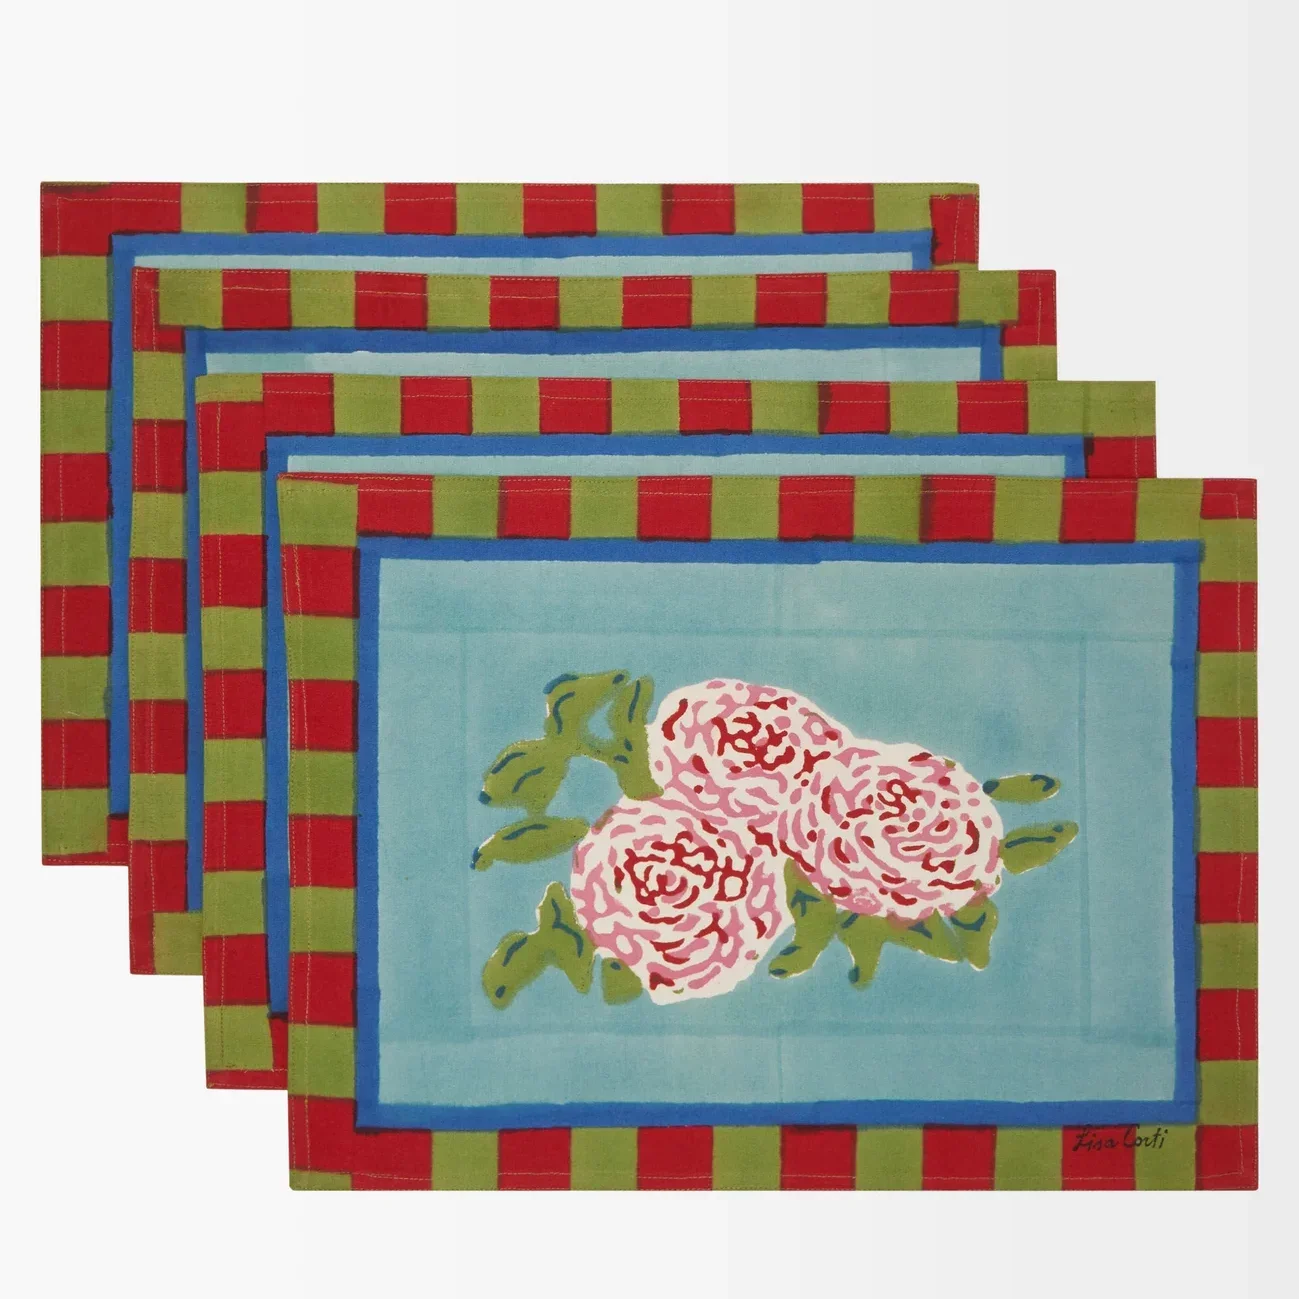 Four floral placemats with red and green striped borders arranged diagonally on a white surface.